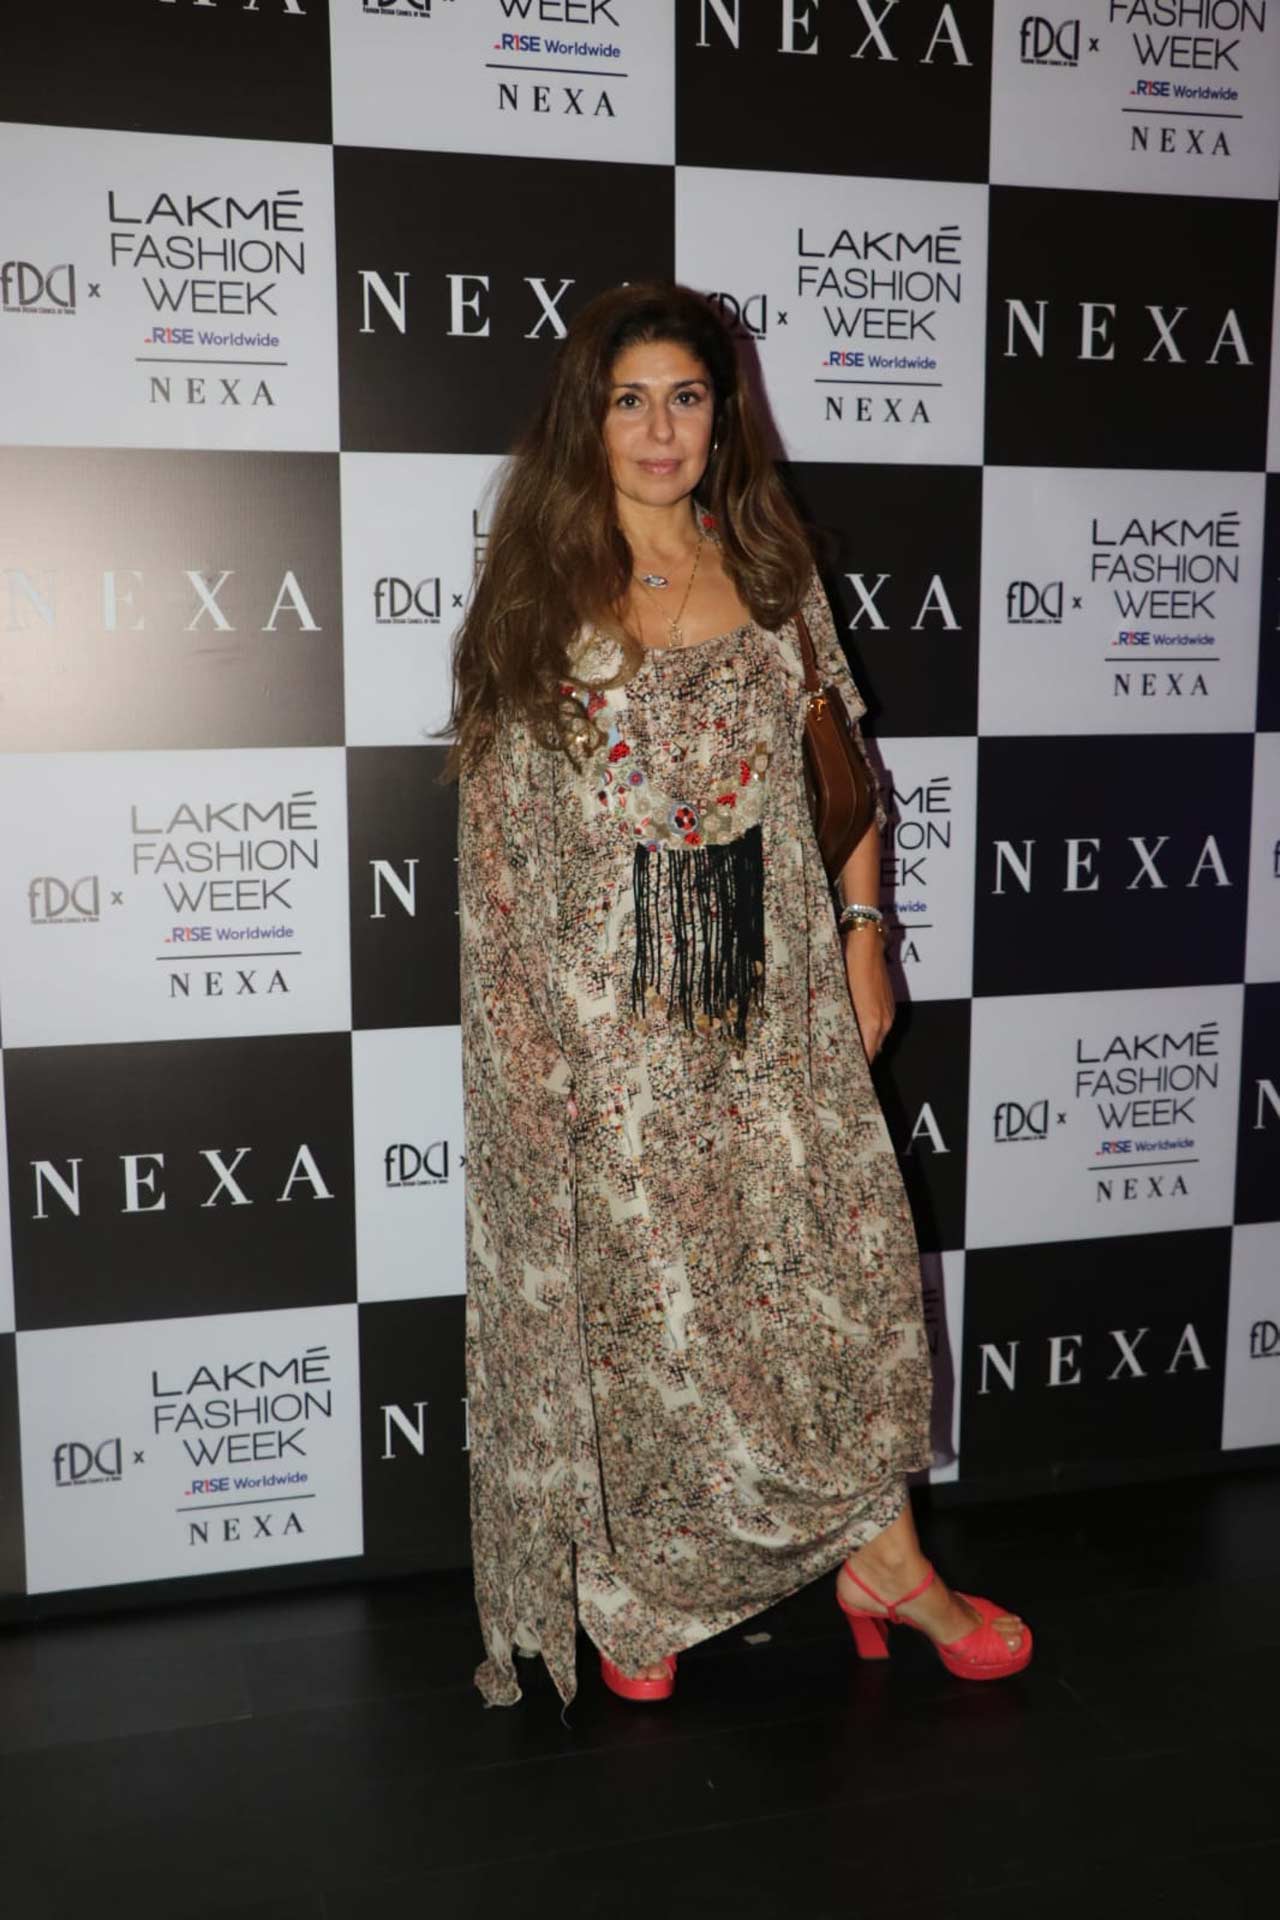 Anaita Shroff Adjania opted for a floral maxi dress as she attended LFW Day 4.